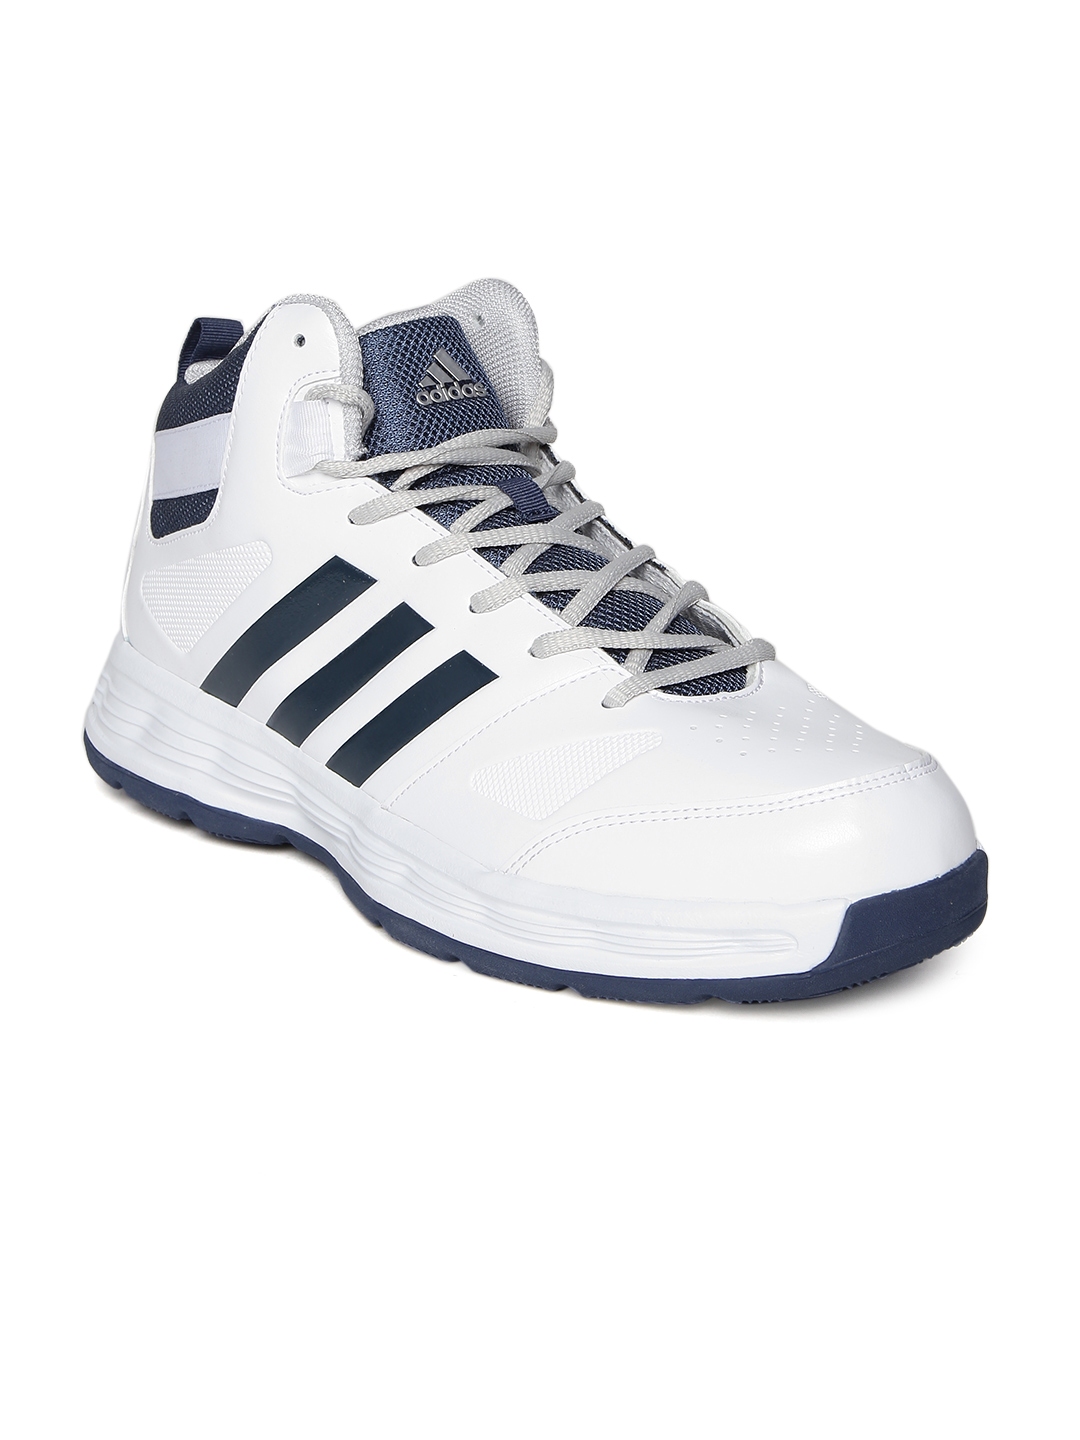 Buy ADIDAS Men White Indomitable Basketball Shoes - Sports Shoes for ...